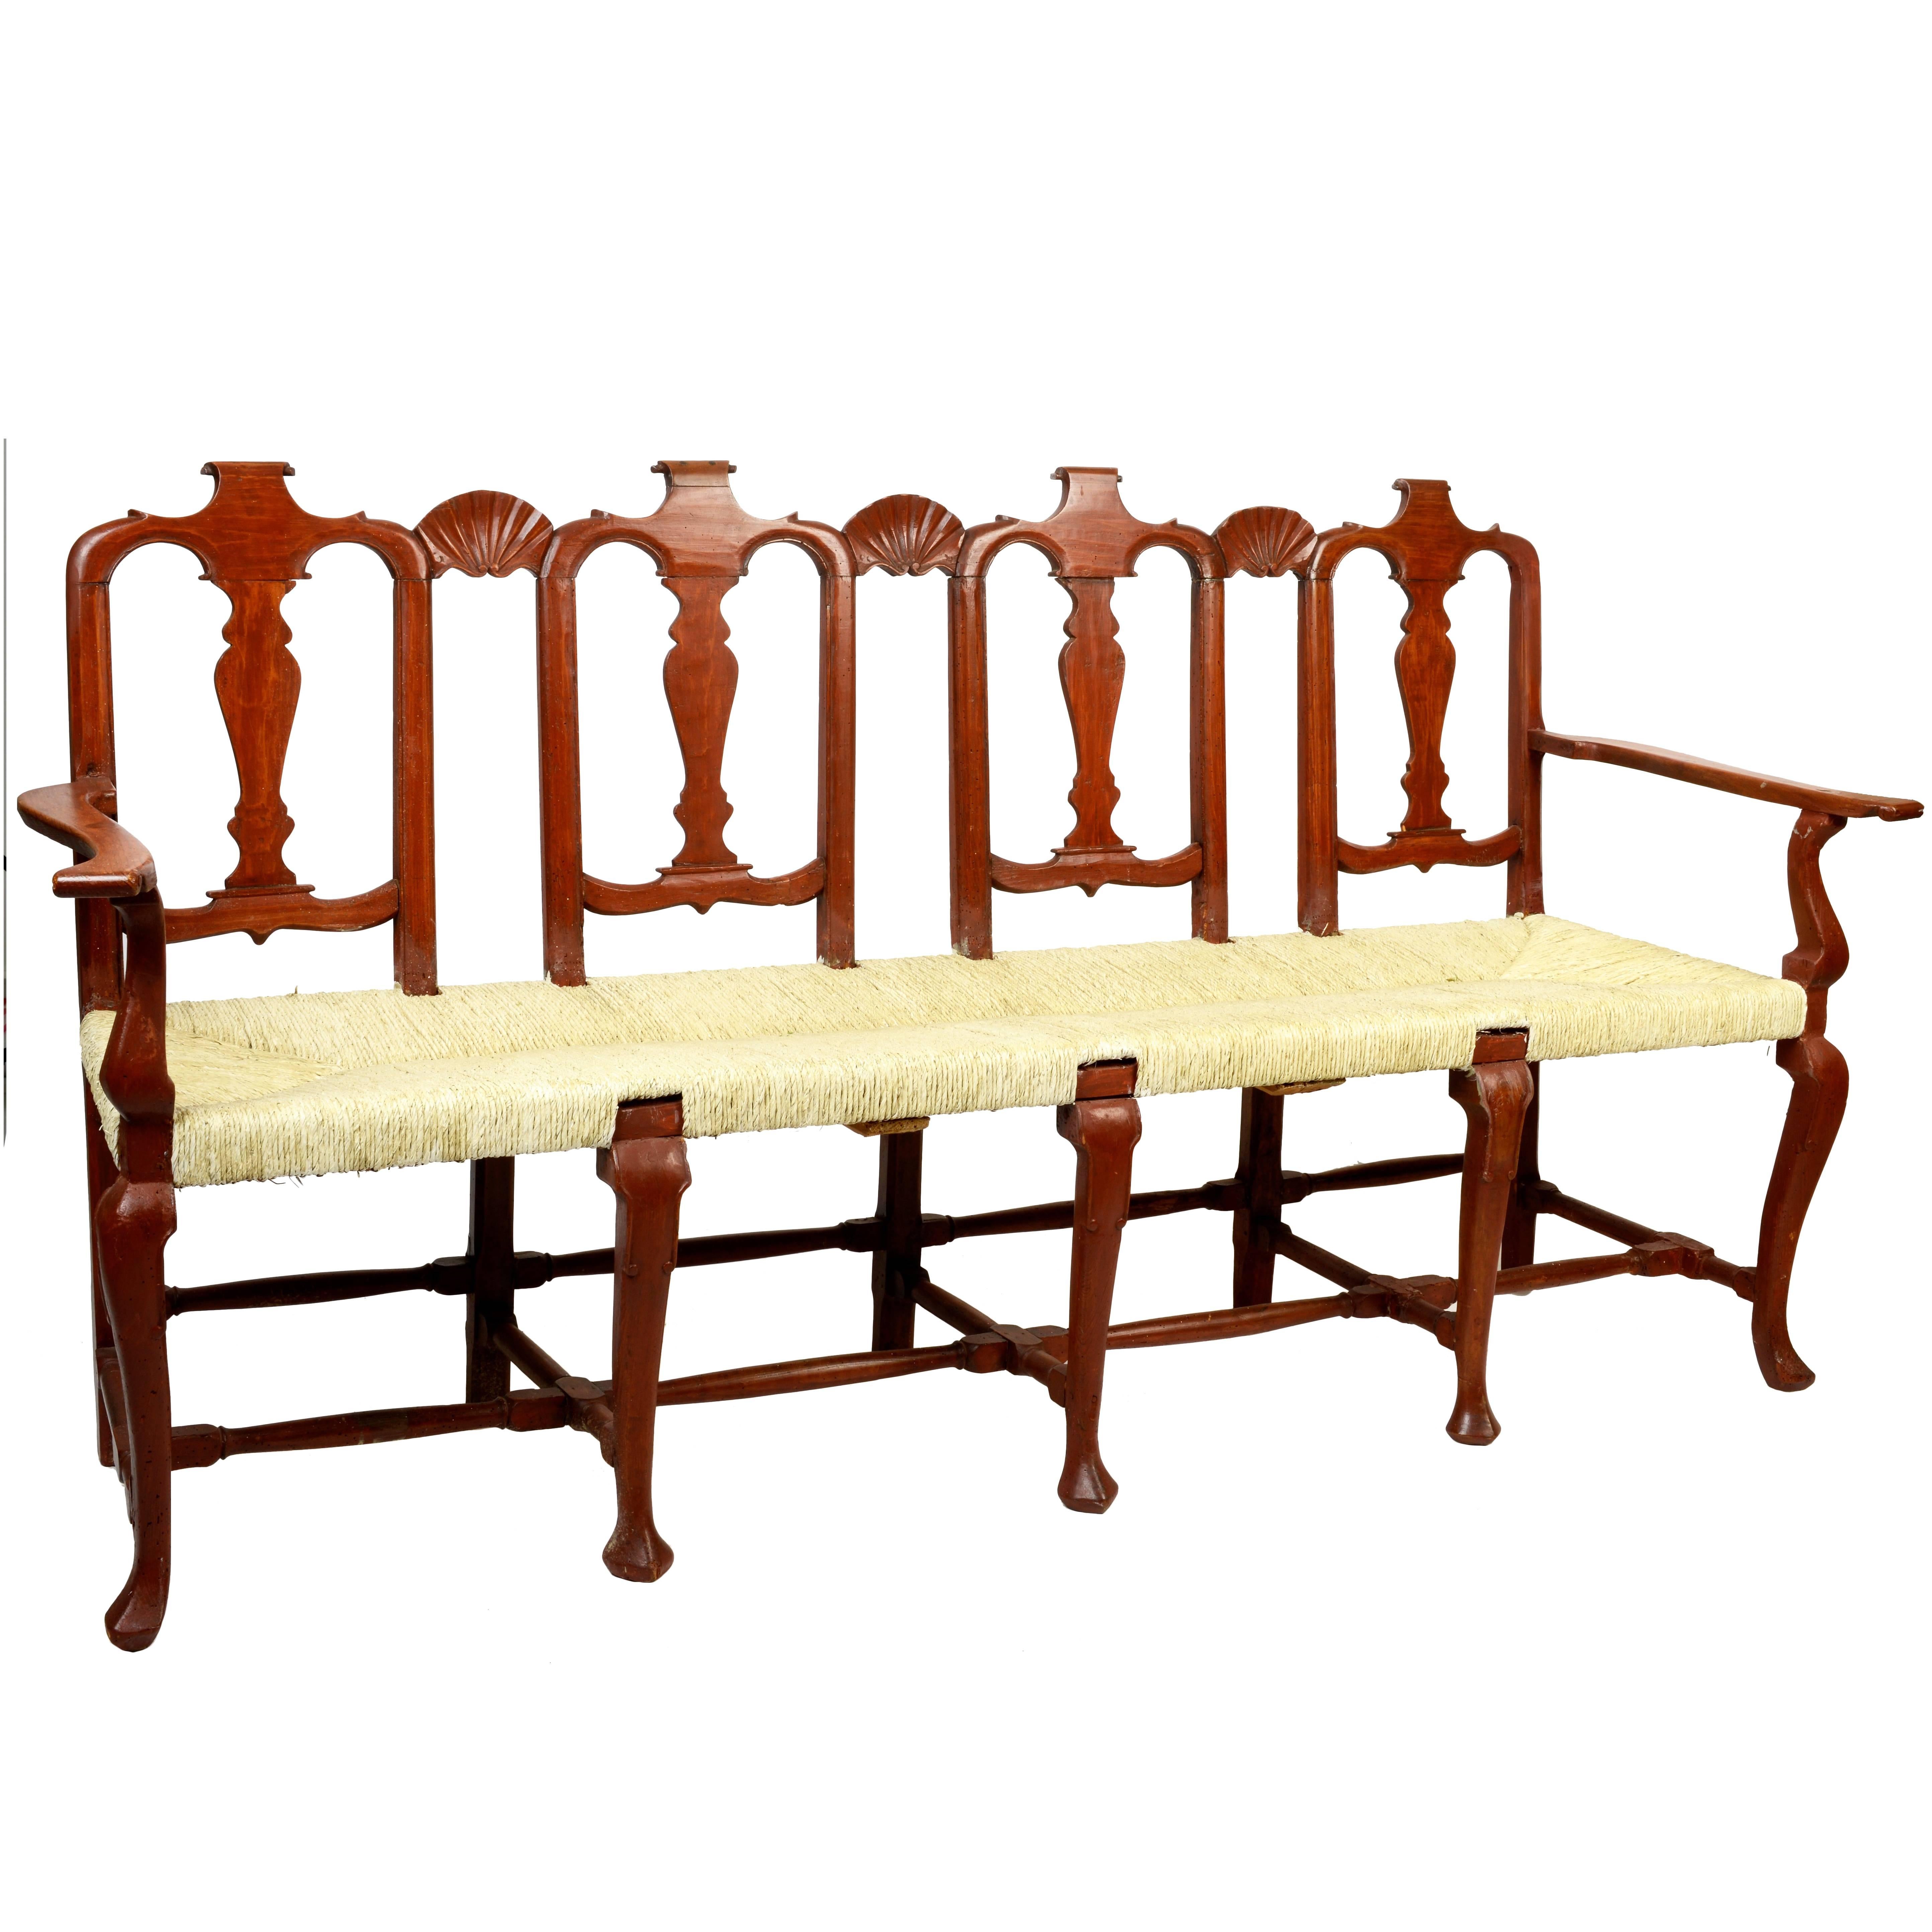 Dutch Rush Seated Walnut Bench, Mid-18th Century For Sale